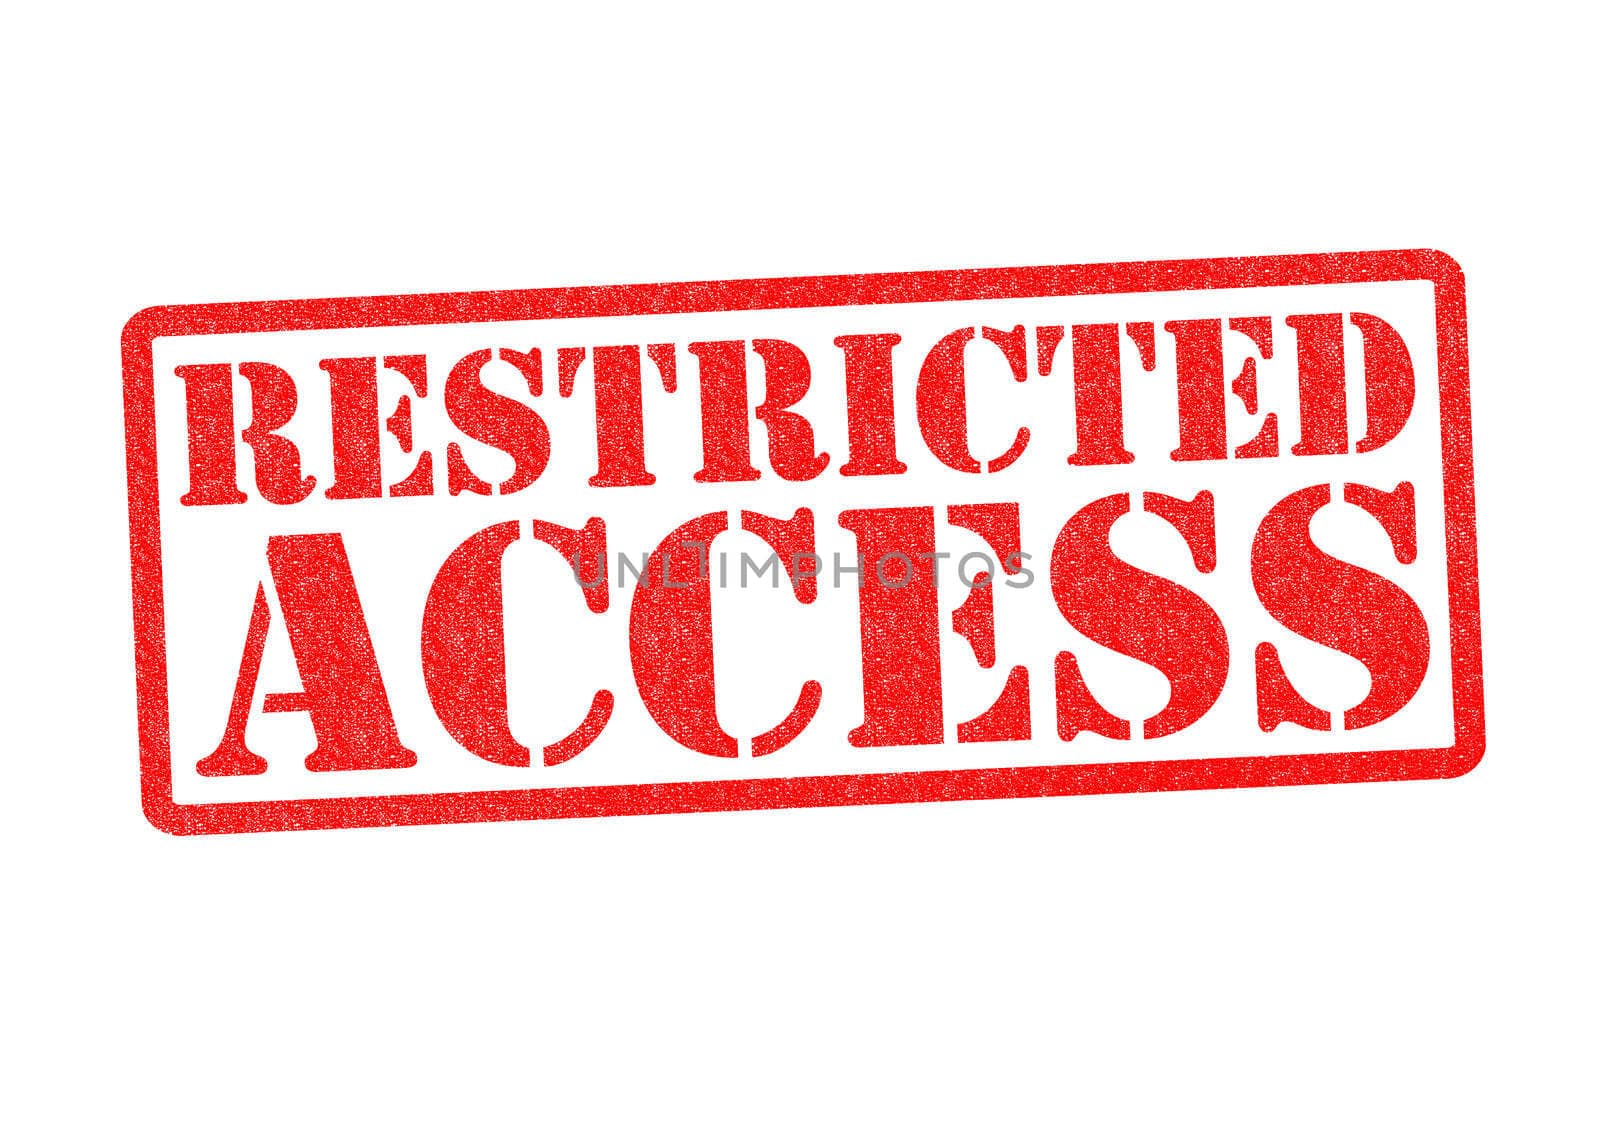 RESTRICTED ACCESS Rubber Stamp over a white background.